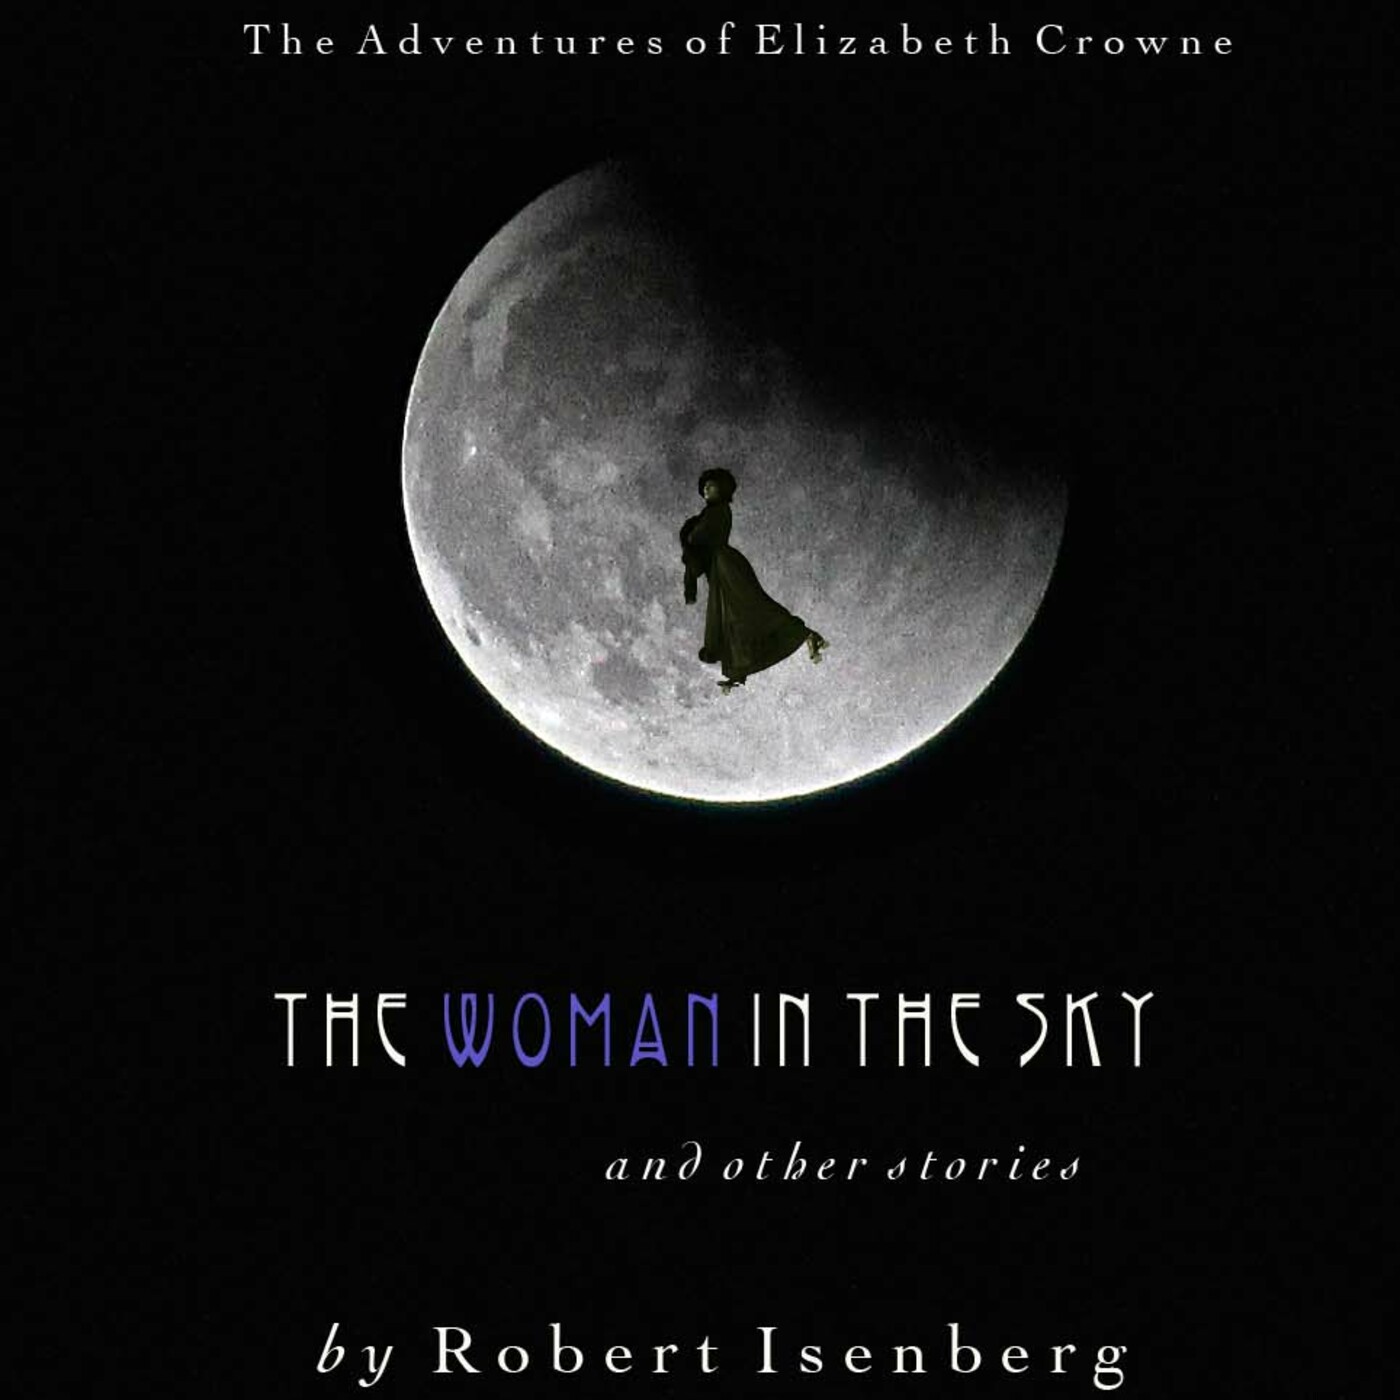 The Woman in the Sky: Episode 2